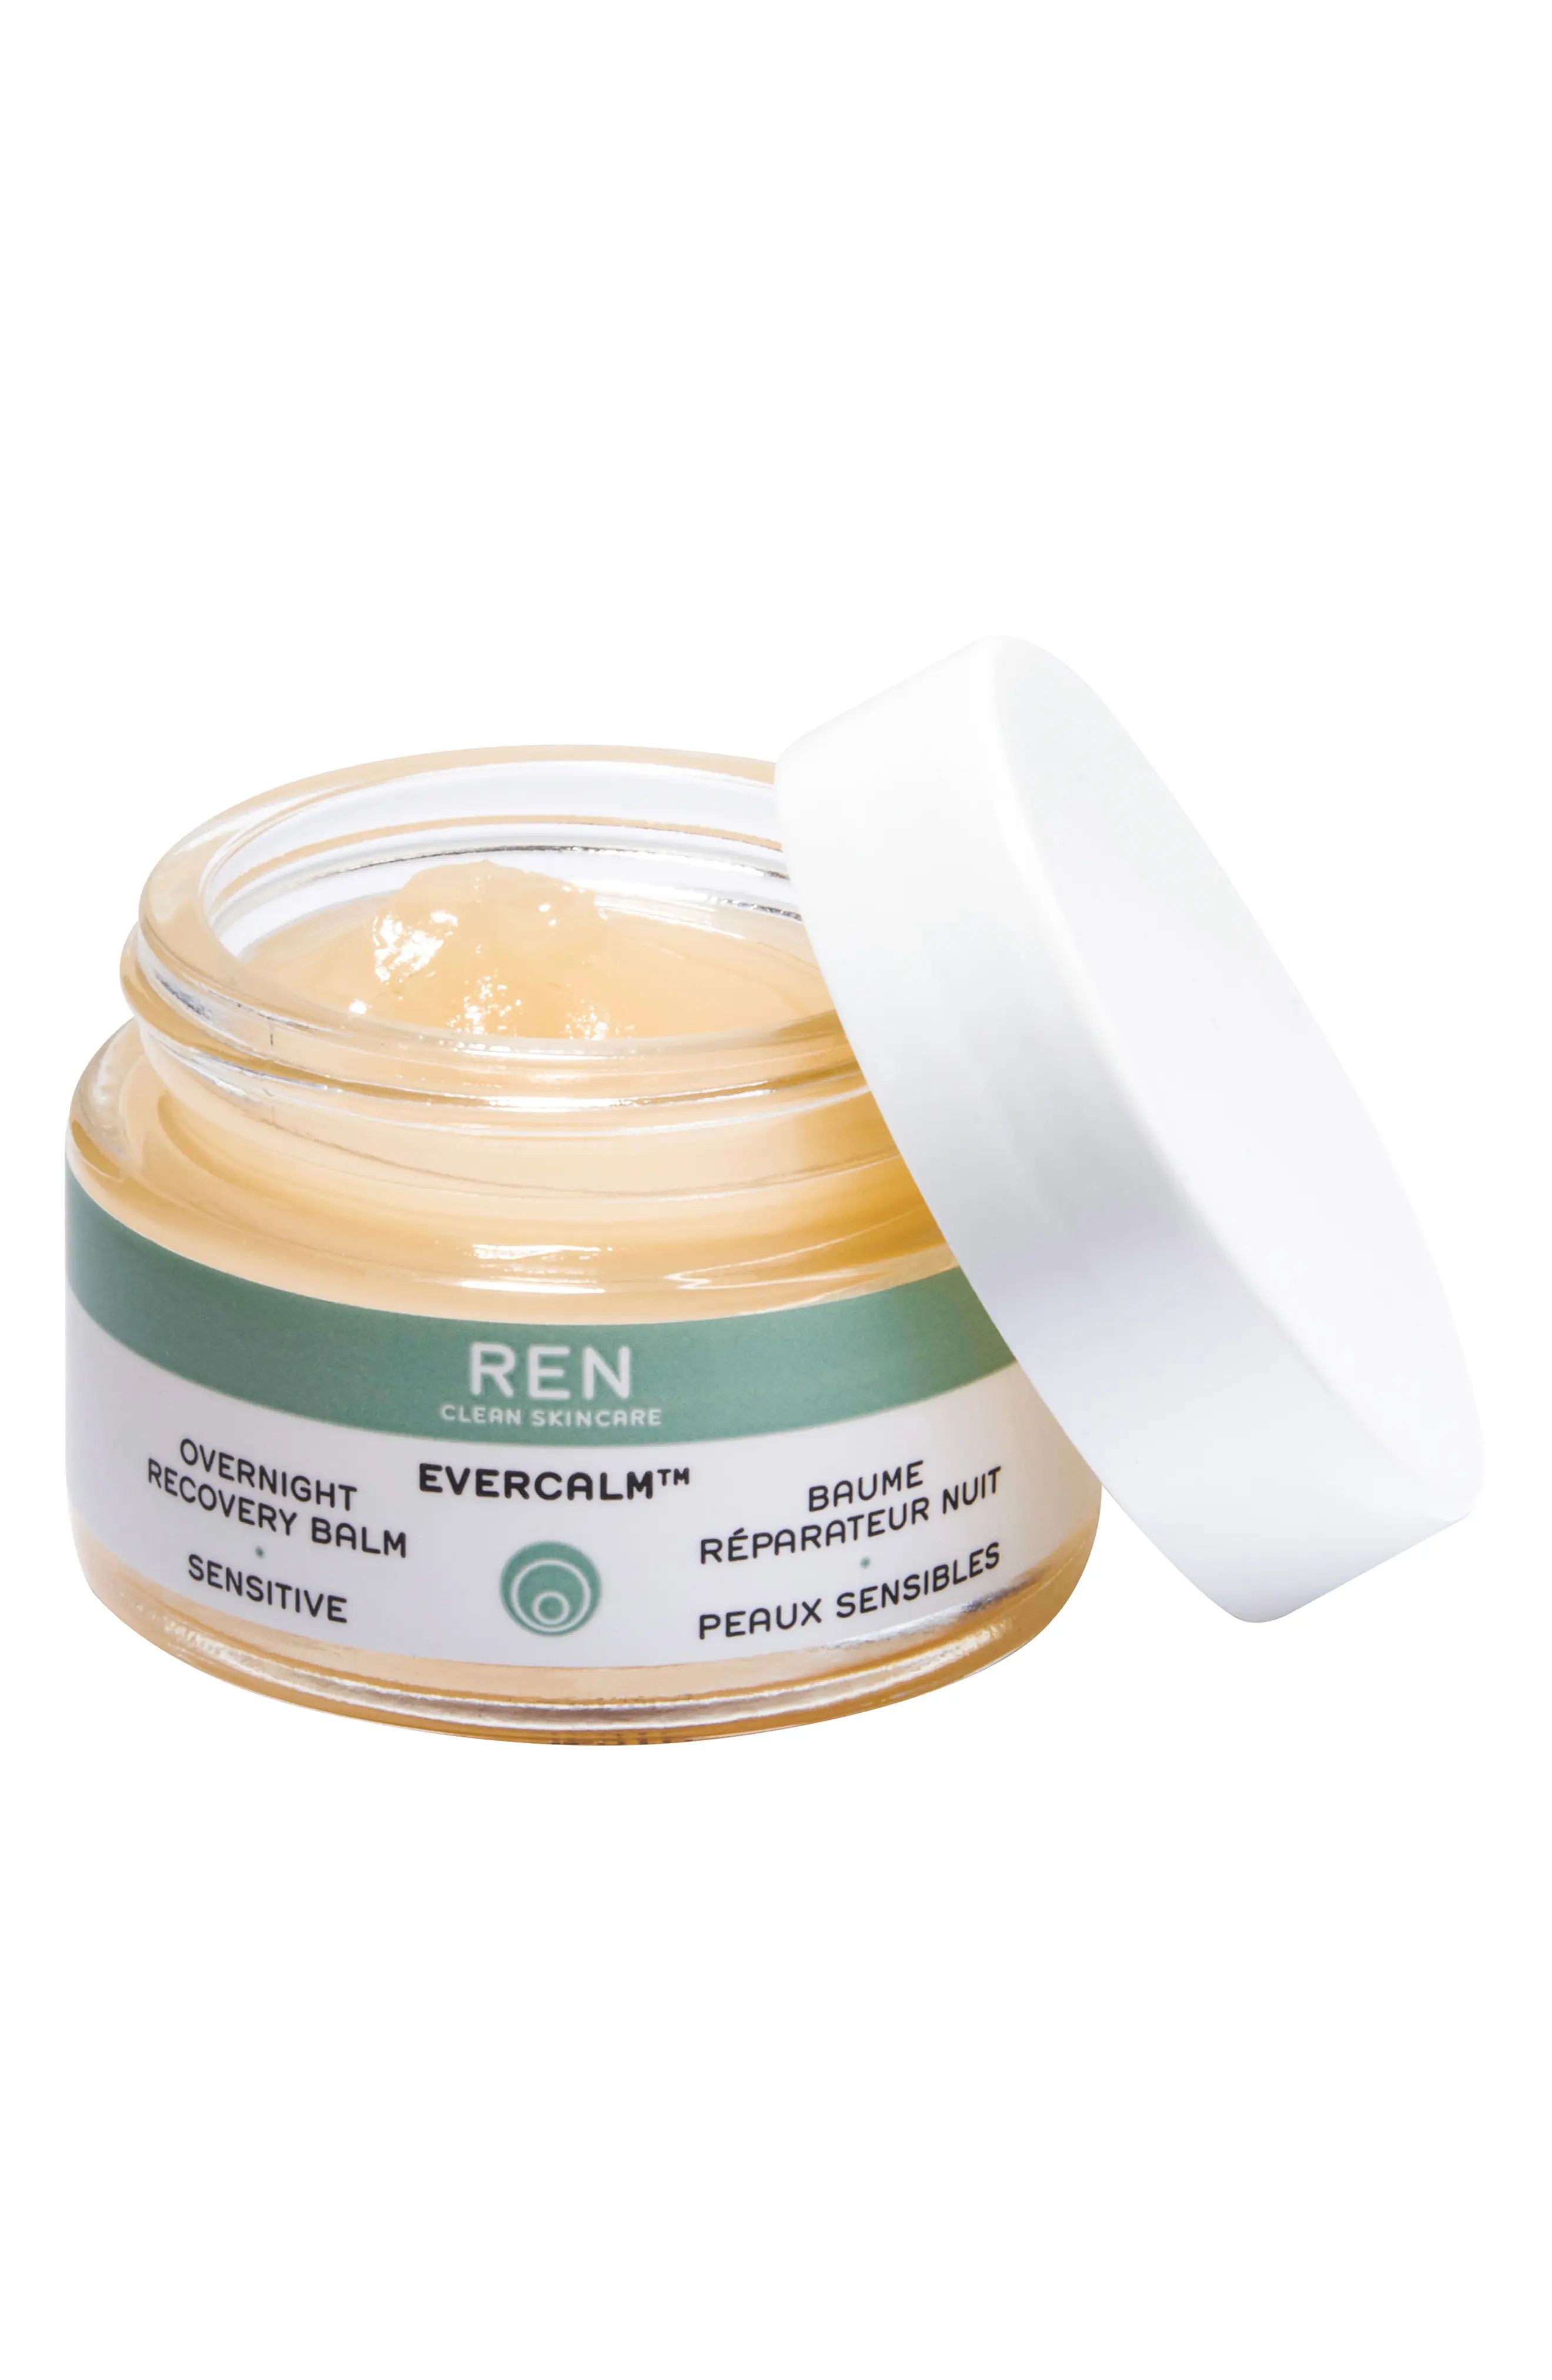 REN Clean Skincare Evercalm(TM) Overnight Recovery Balm at Nordstrom | Nordstrom